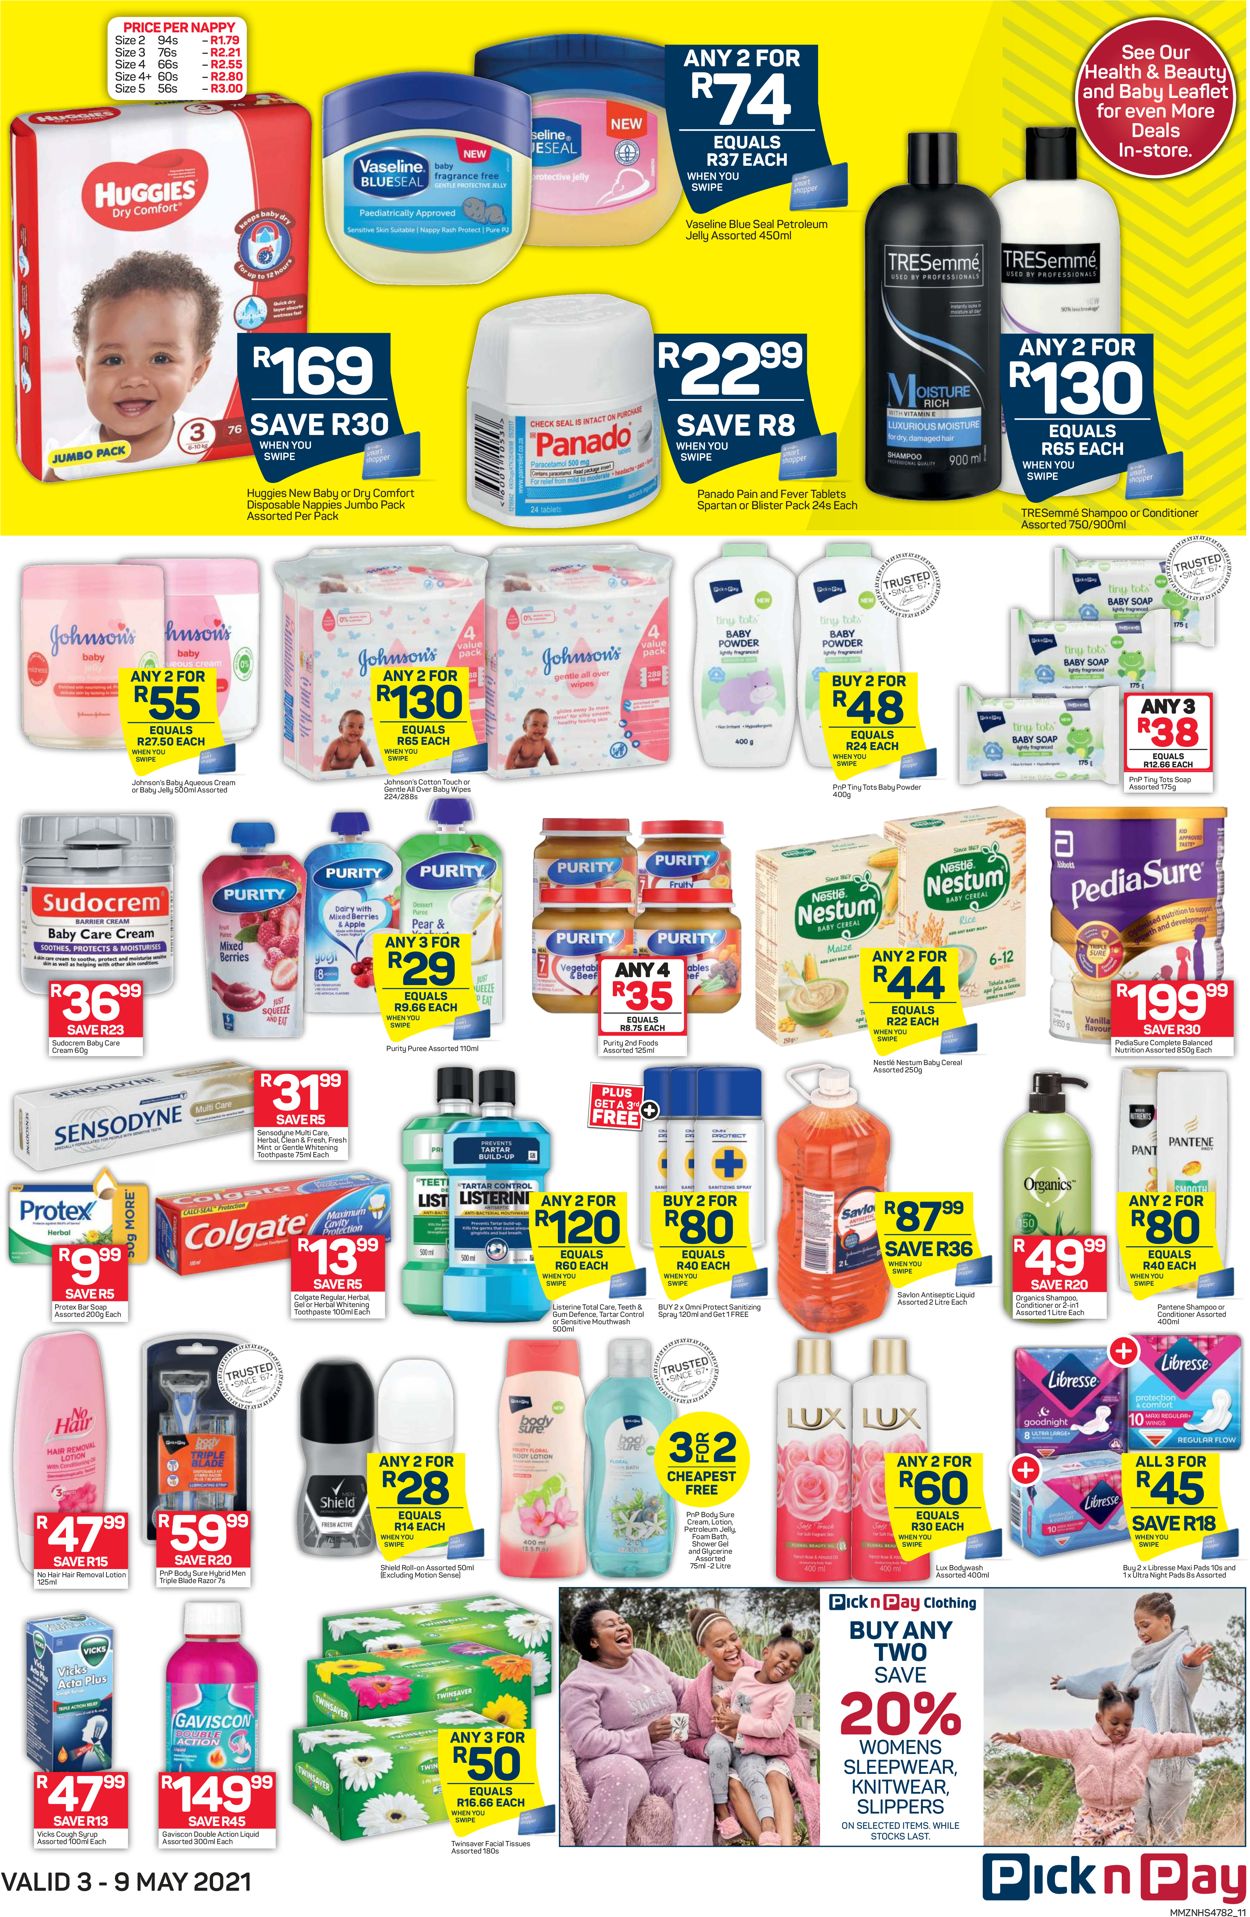 Pick n Pay Catalogue - 2021/05/03-2021/05/09 (Page 11)